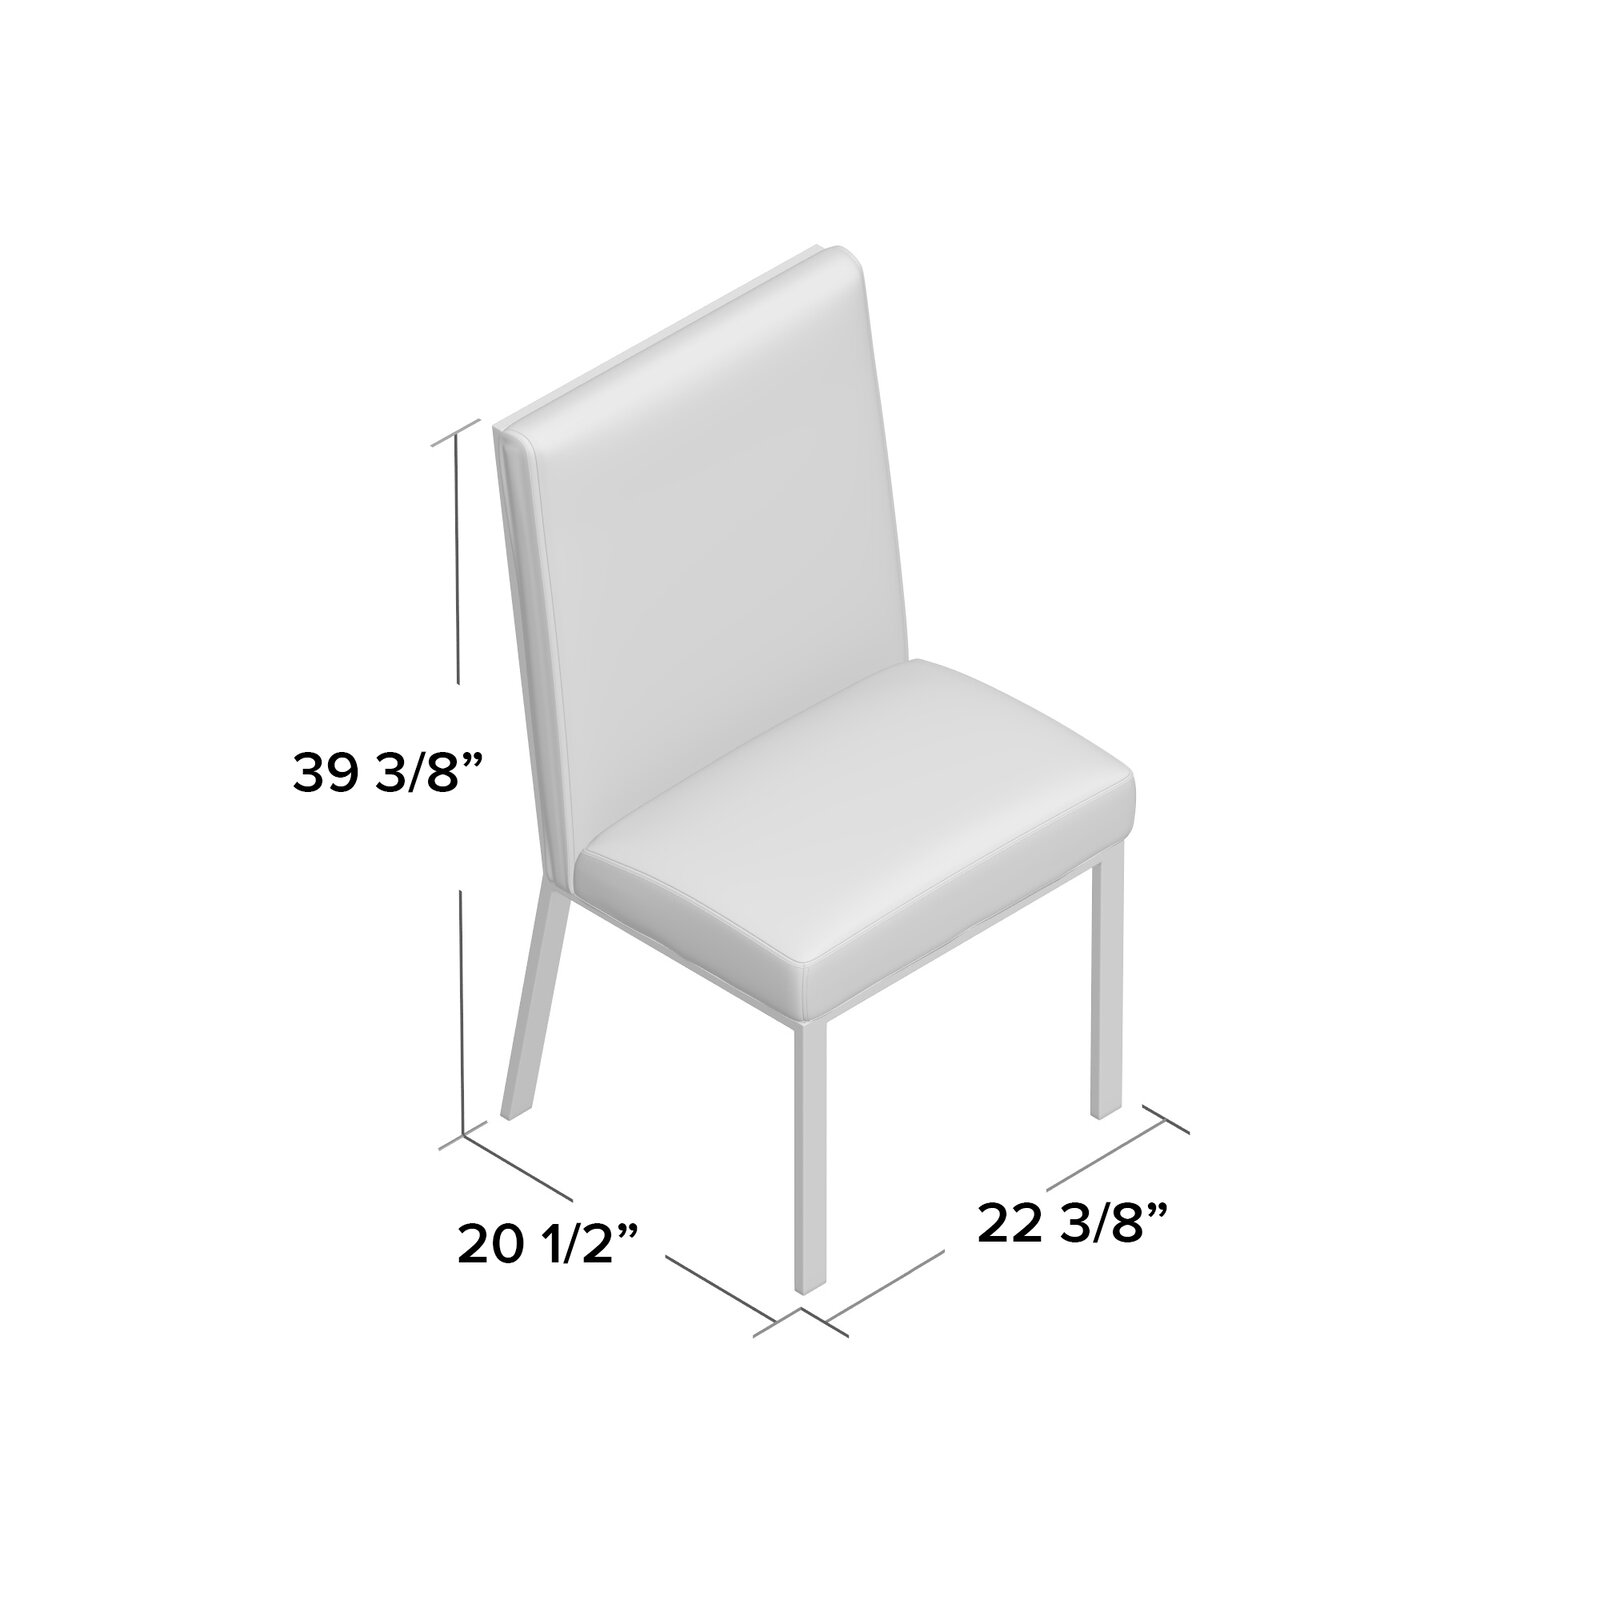 Almodovar Modern Premium Upholstered Dining Chair, Back Style: Solid back, Adult Assembly Required: Yes - image 4 of 6